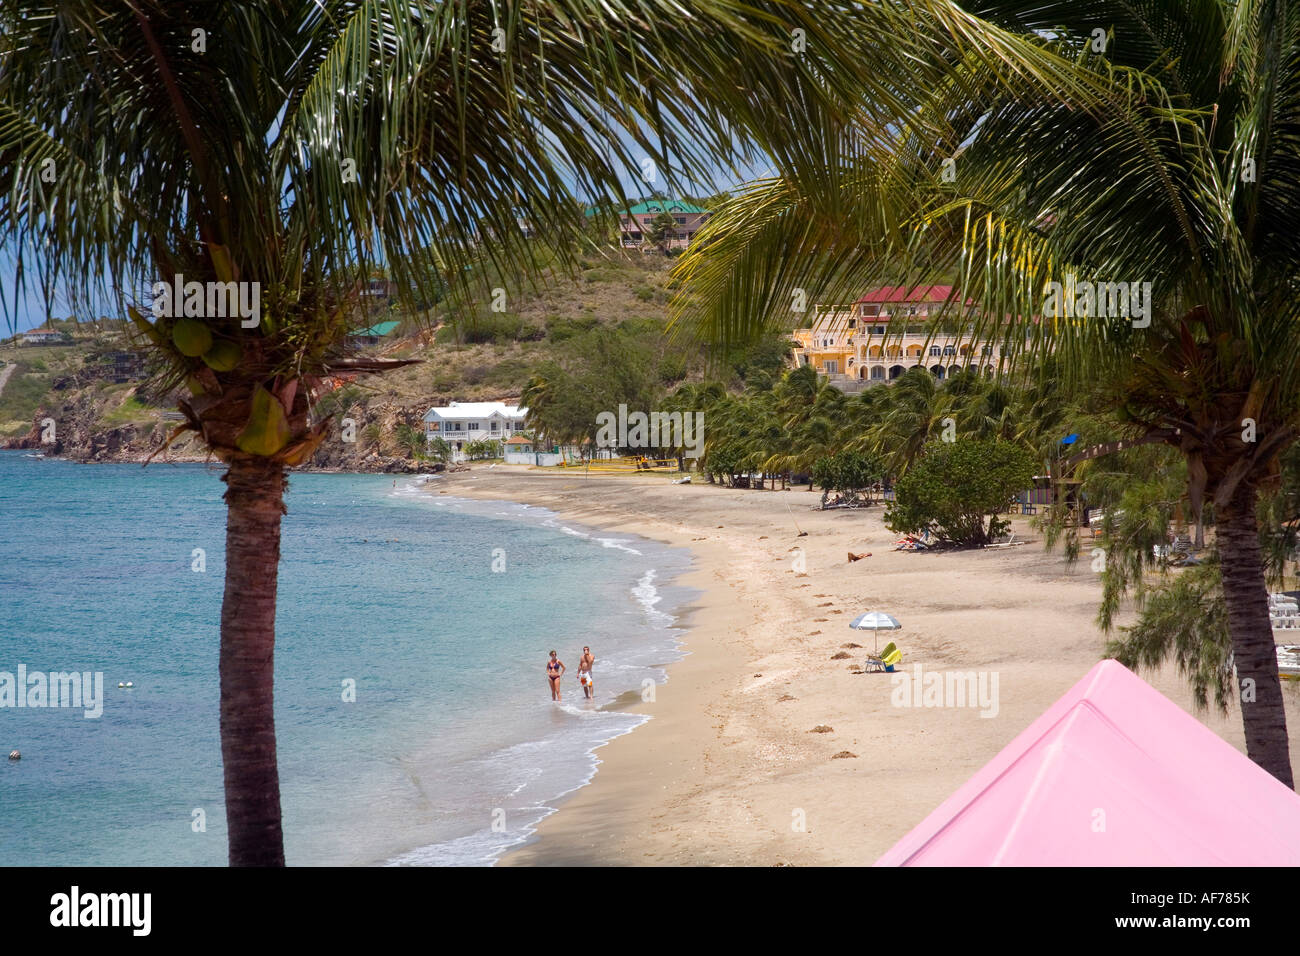 Timothy Hotel Beach at Frigate bay St Kitts in the Caribbean Stock Photo